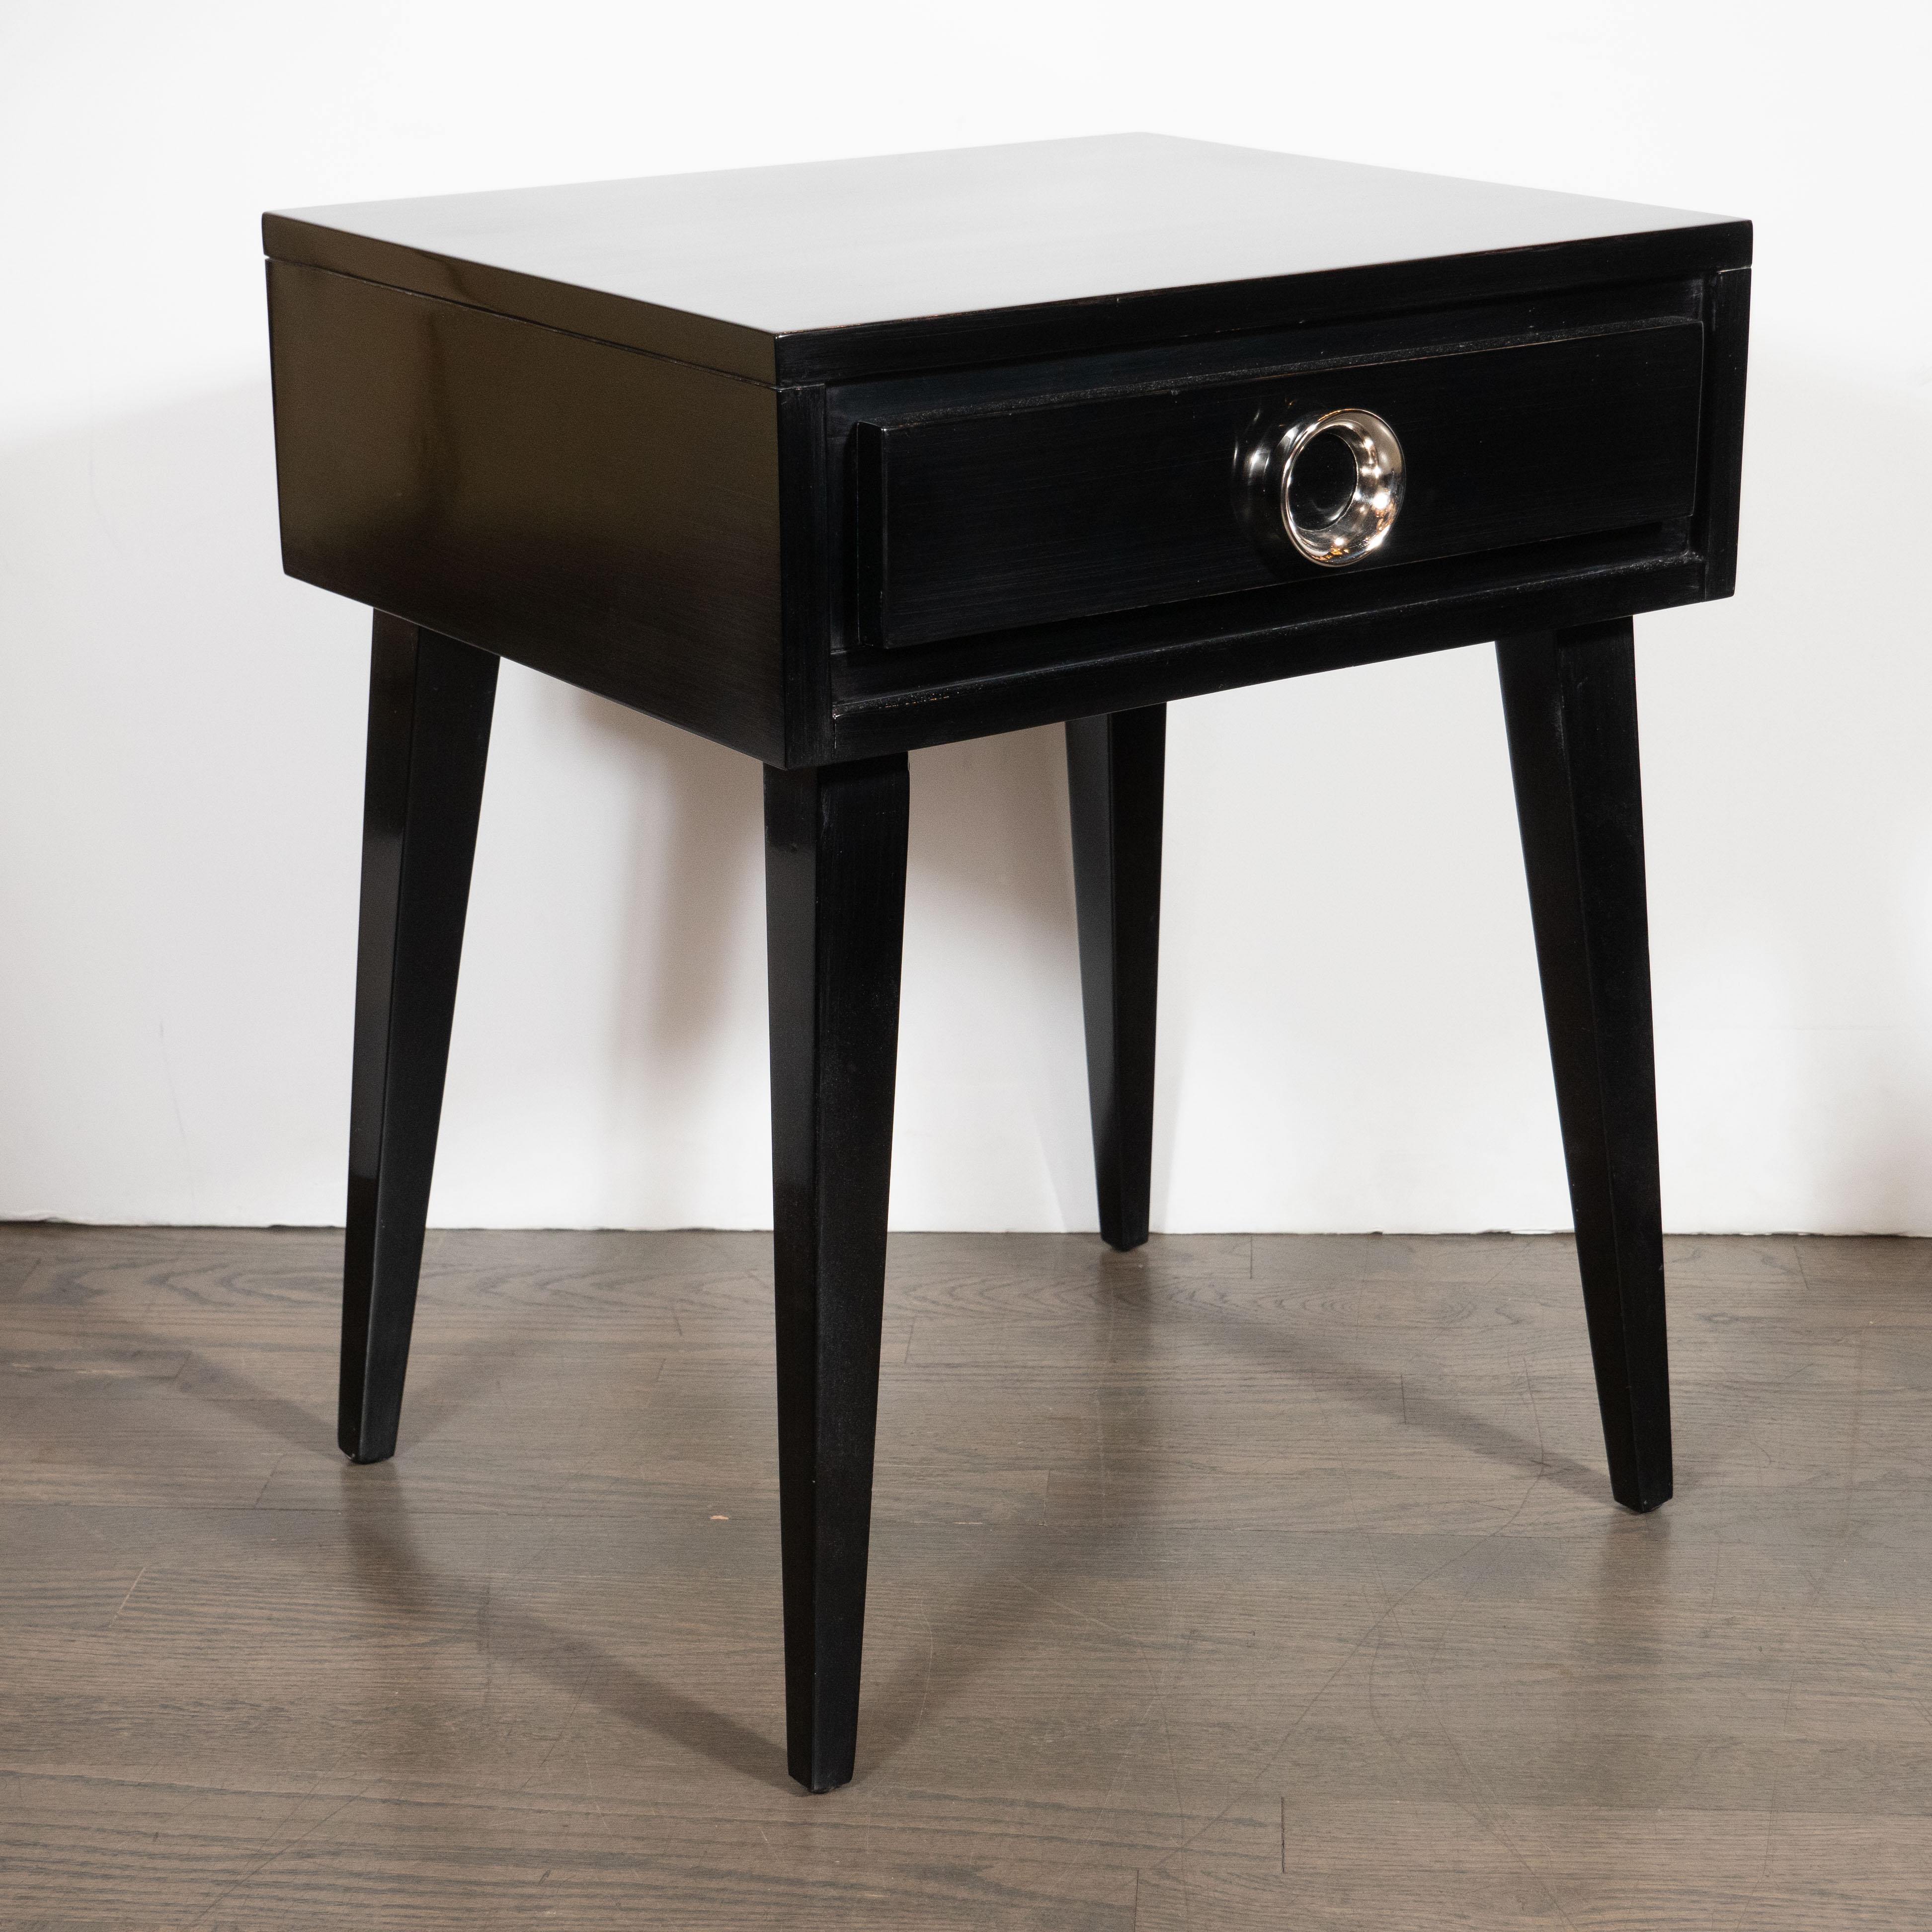 This elegant pair of Mid-Century Modern nightstands were realized in the United States, circa 1950. They features volumetric rectangular bodies with tapered rectangular legs; a central drawer; and circular nickeled pulls. With their clean modernist